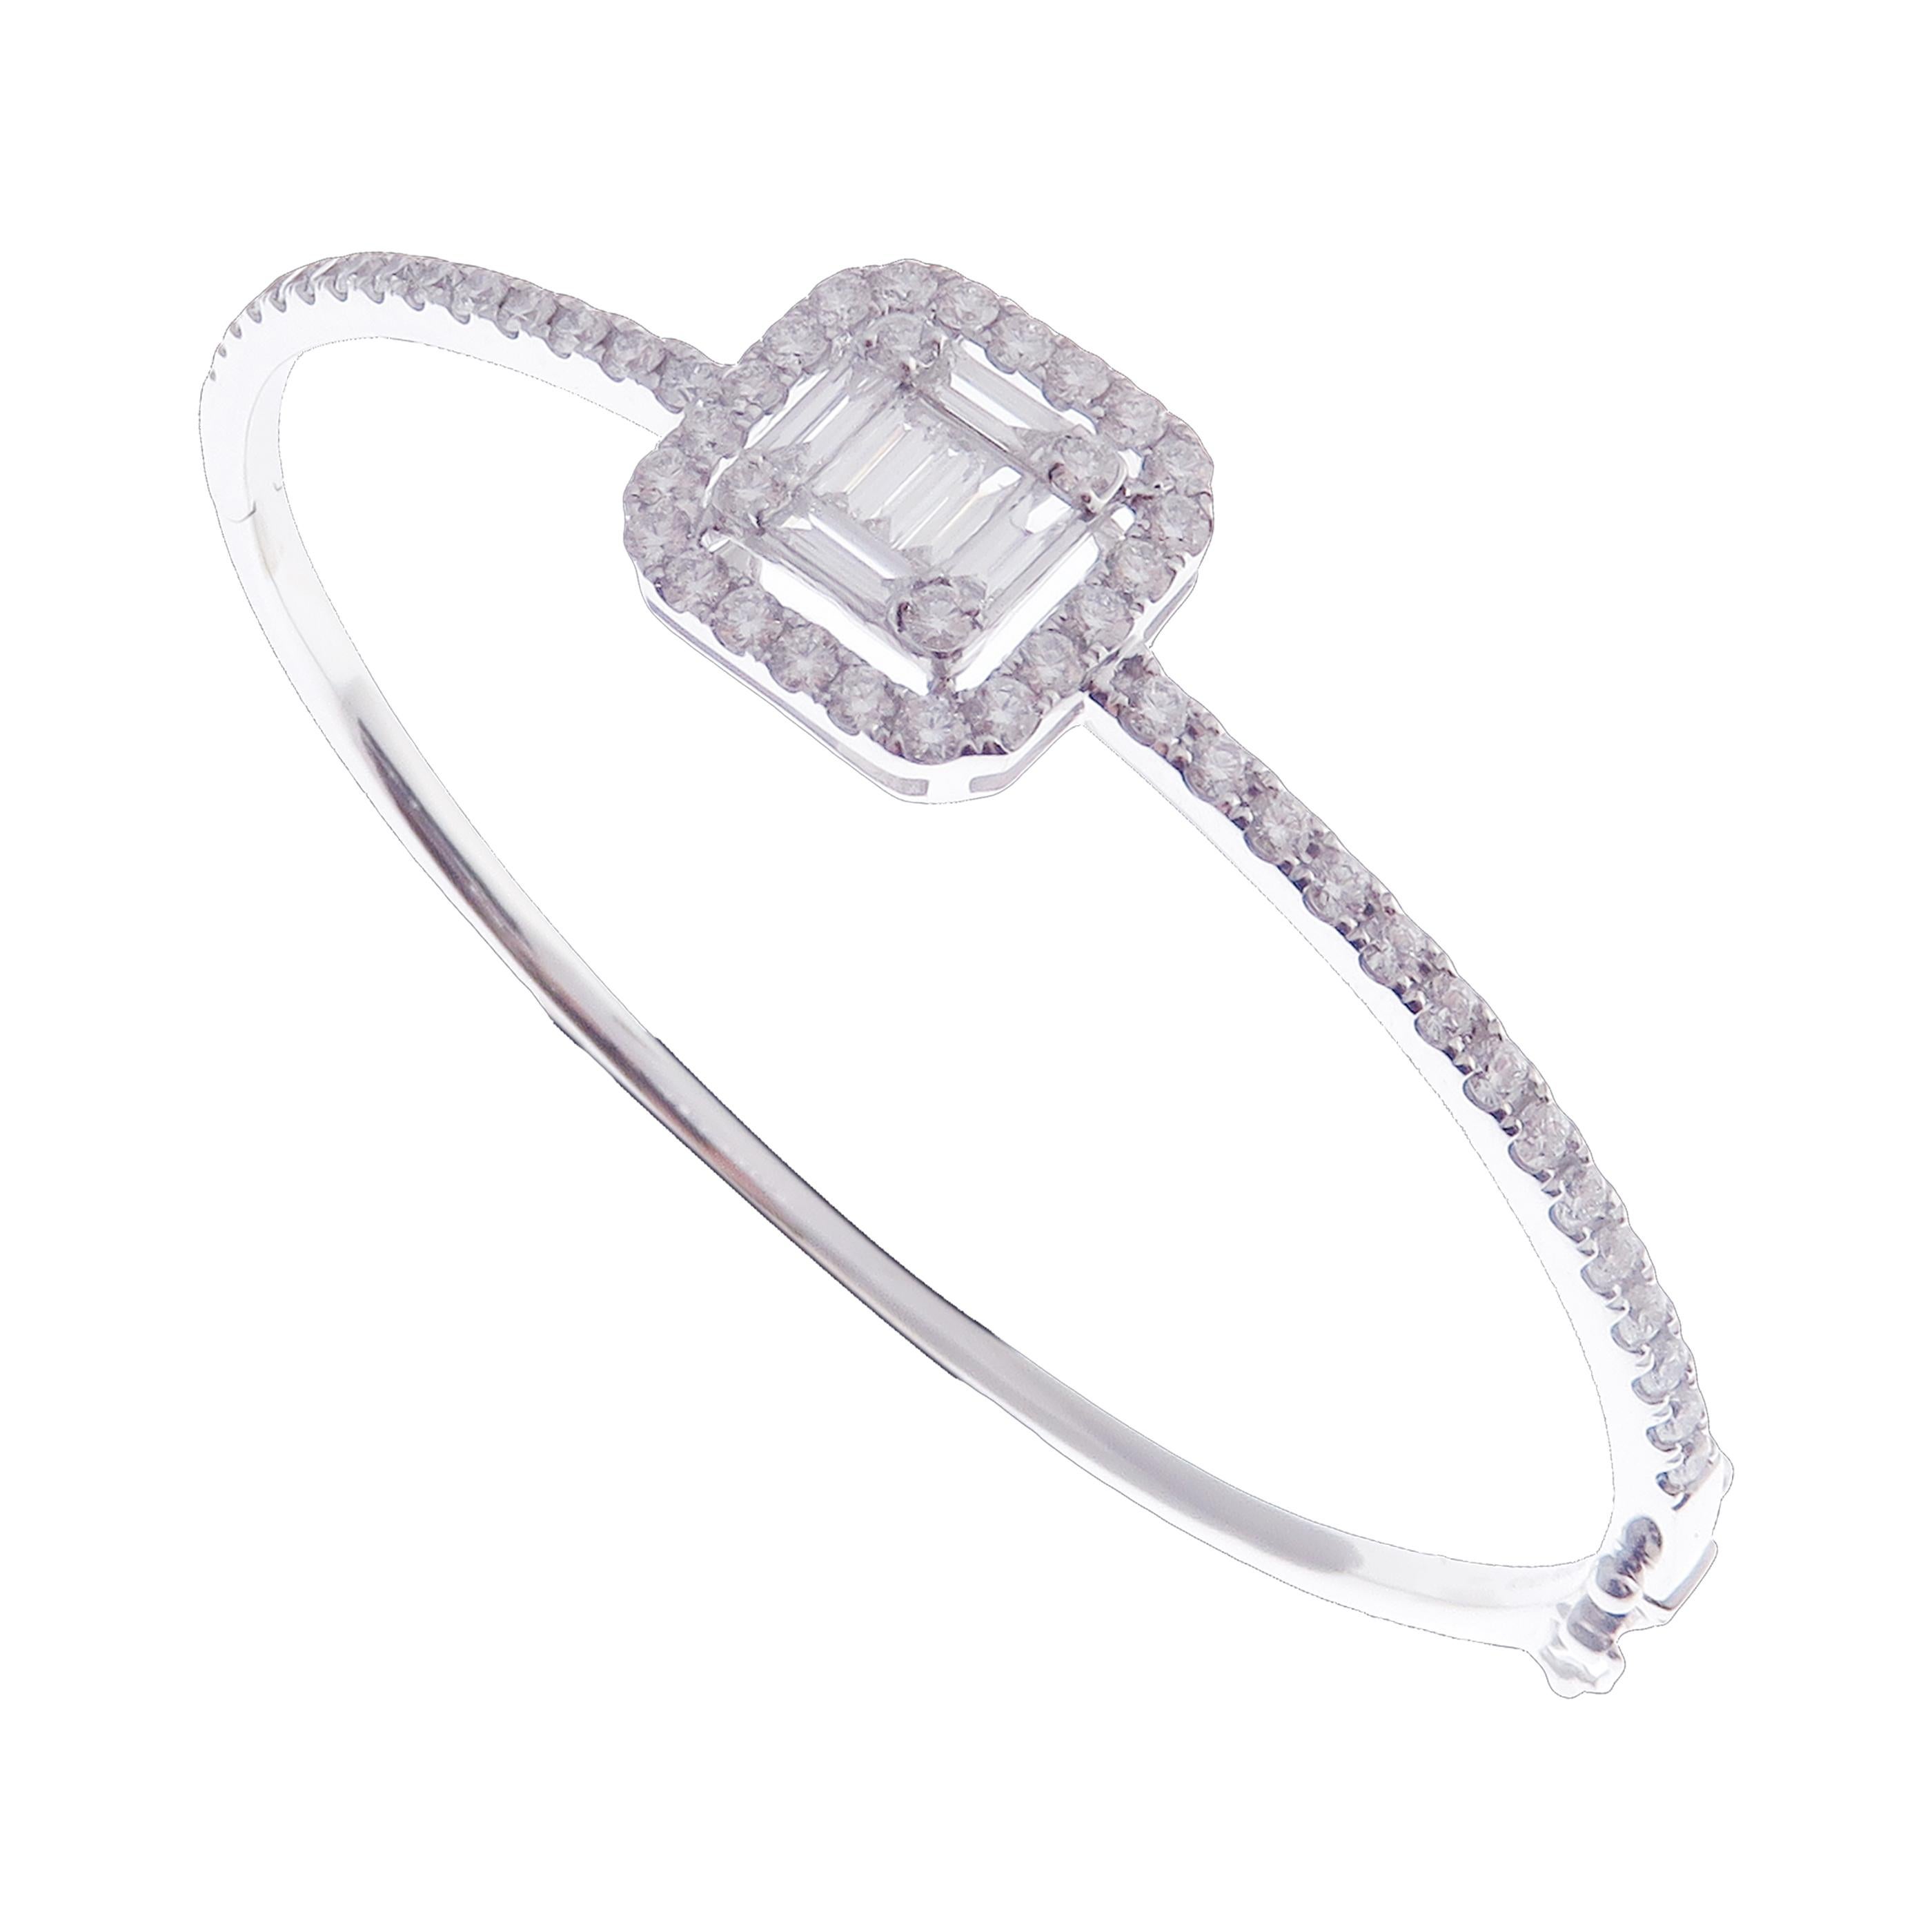 This delicate baguette square bangle is crafted in 18-karat white gold, weighing approximately 1.72 total carats of V-Quality white diamond. Side clasp closure. 

Fits wrists up to 6.25